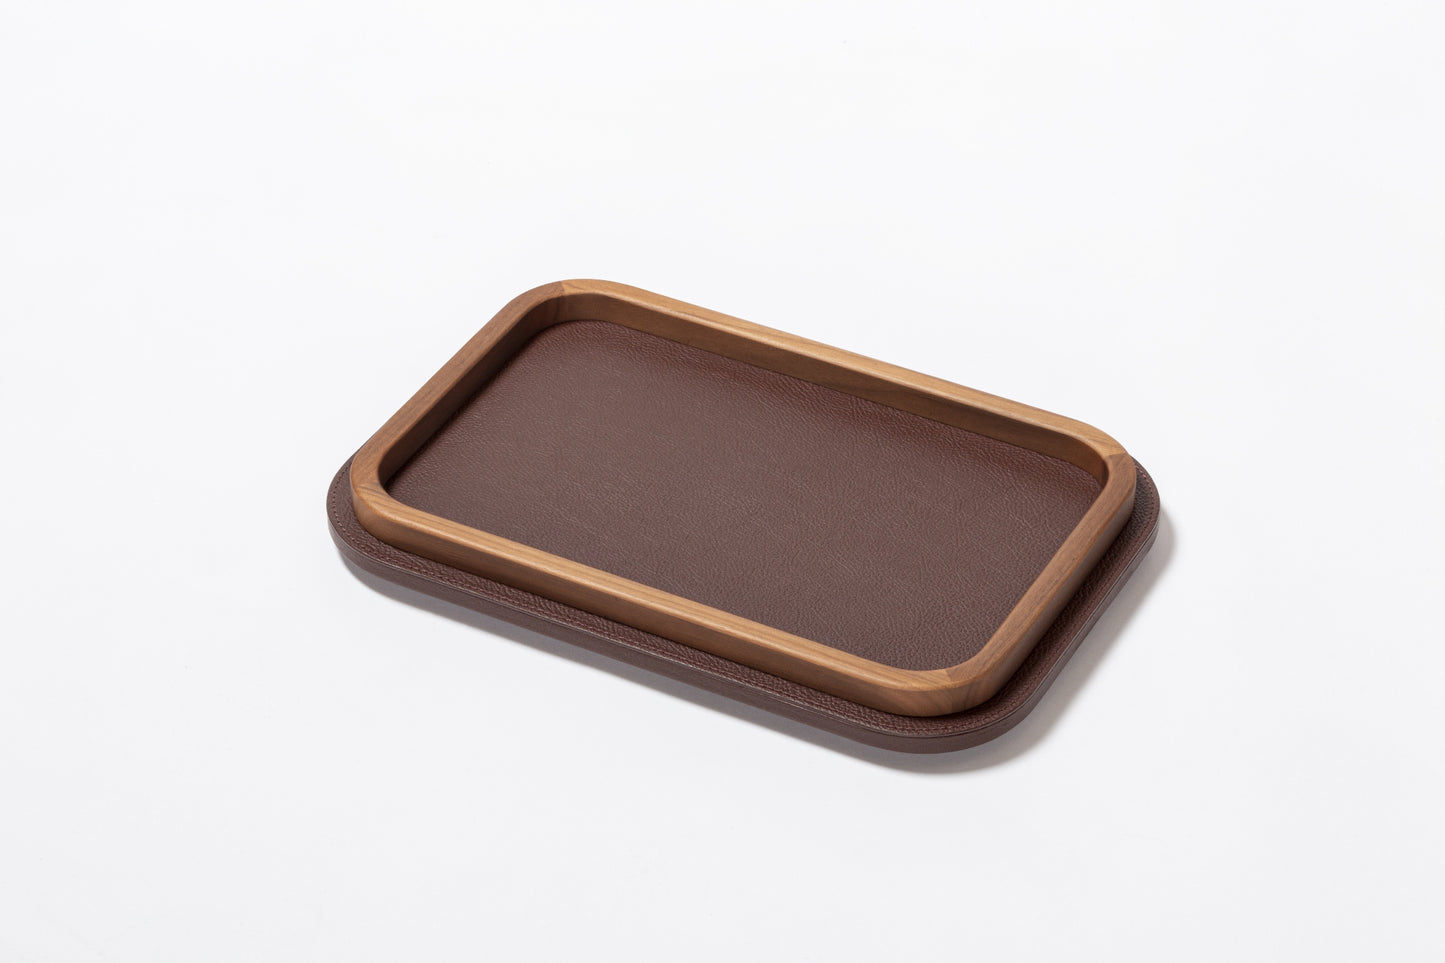 Giobagnara x Poltrona Frau Rectangular Rounded Tray with Wood Frame | Leather-Covered Trays with Rounded Corners | Walnut Wood Frame for Elegant Design | Explore a Range of Stylish Trays and Home Decor at 2Jour Concierge, #1 luxury high-end gift & lifestyle shop